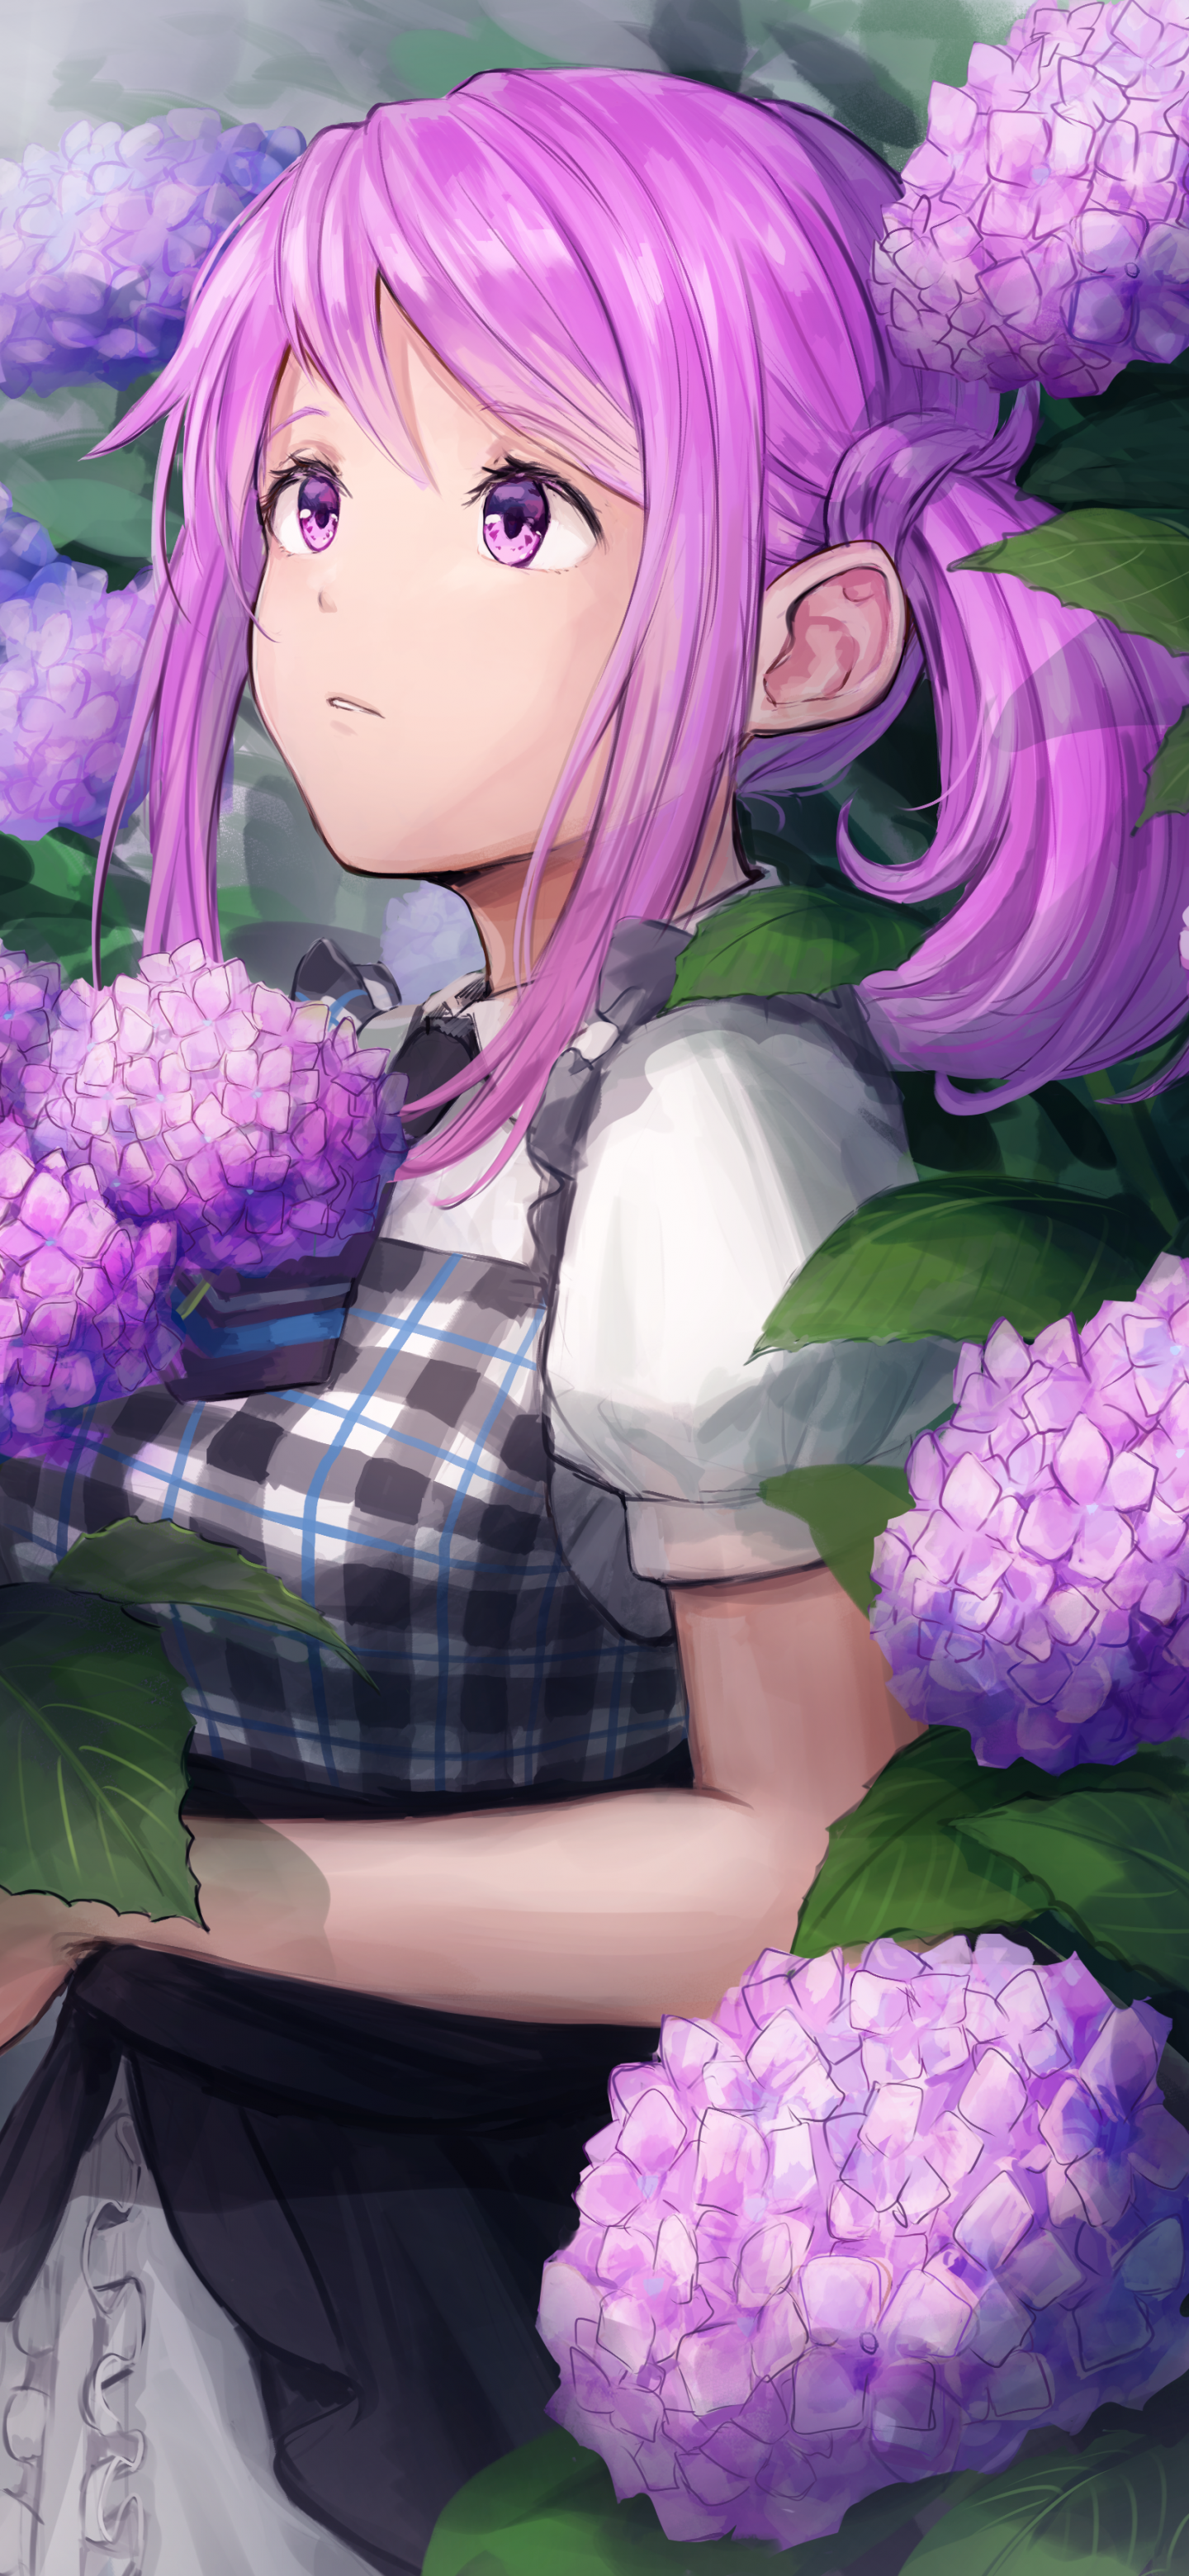 Download 1440x3120 Anime Girl, Purple Flowers, Cute, Profile View, Looking Away Wallpaper for Huawei Mate 20 Pro, LG G7 ThinQ, LG V40 ThinQ